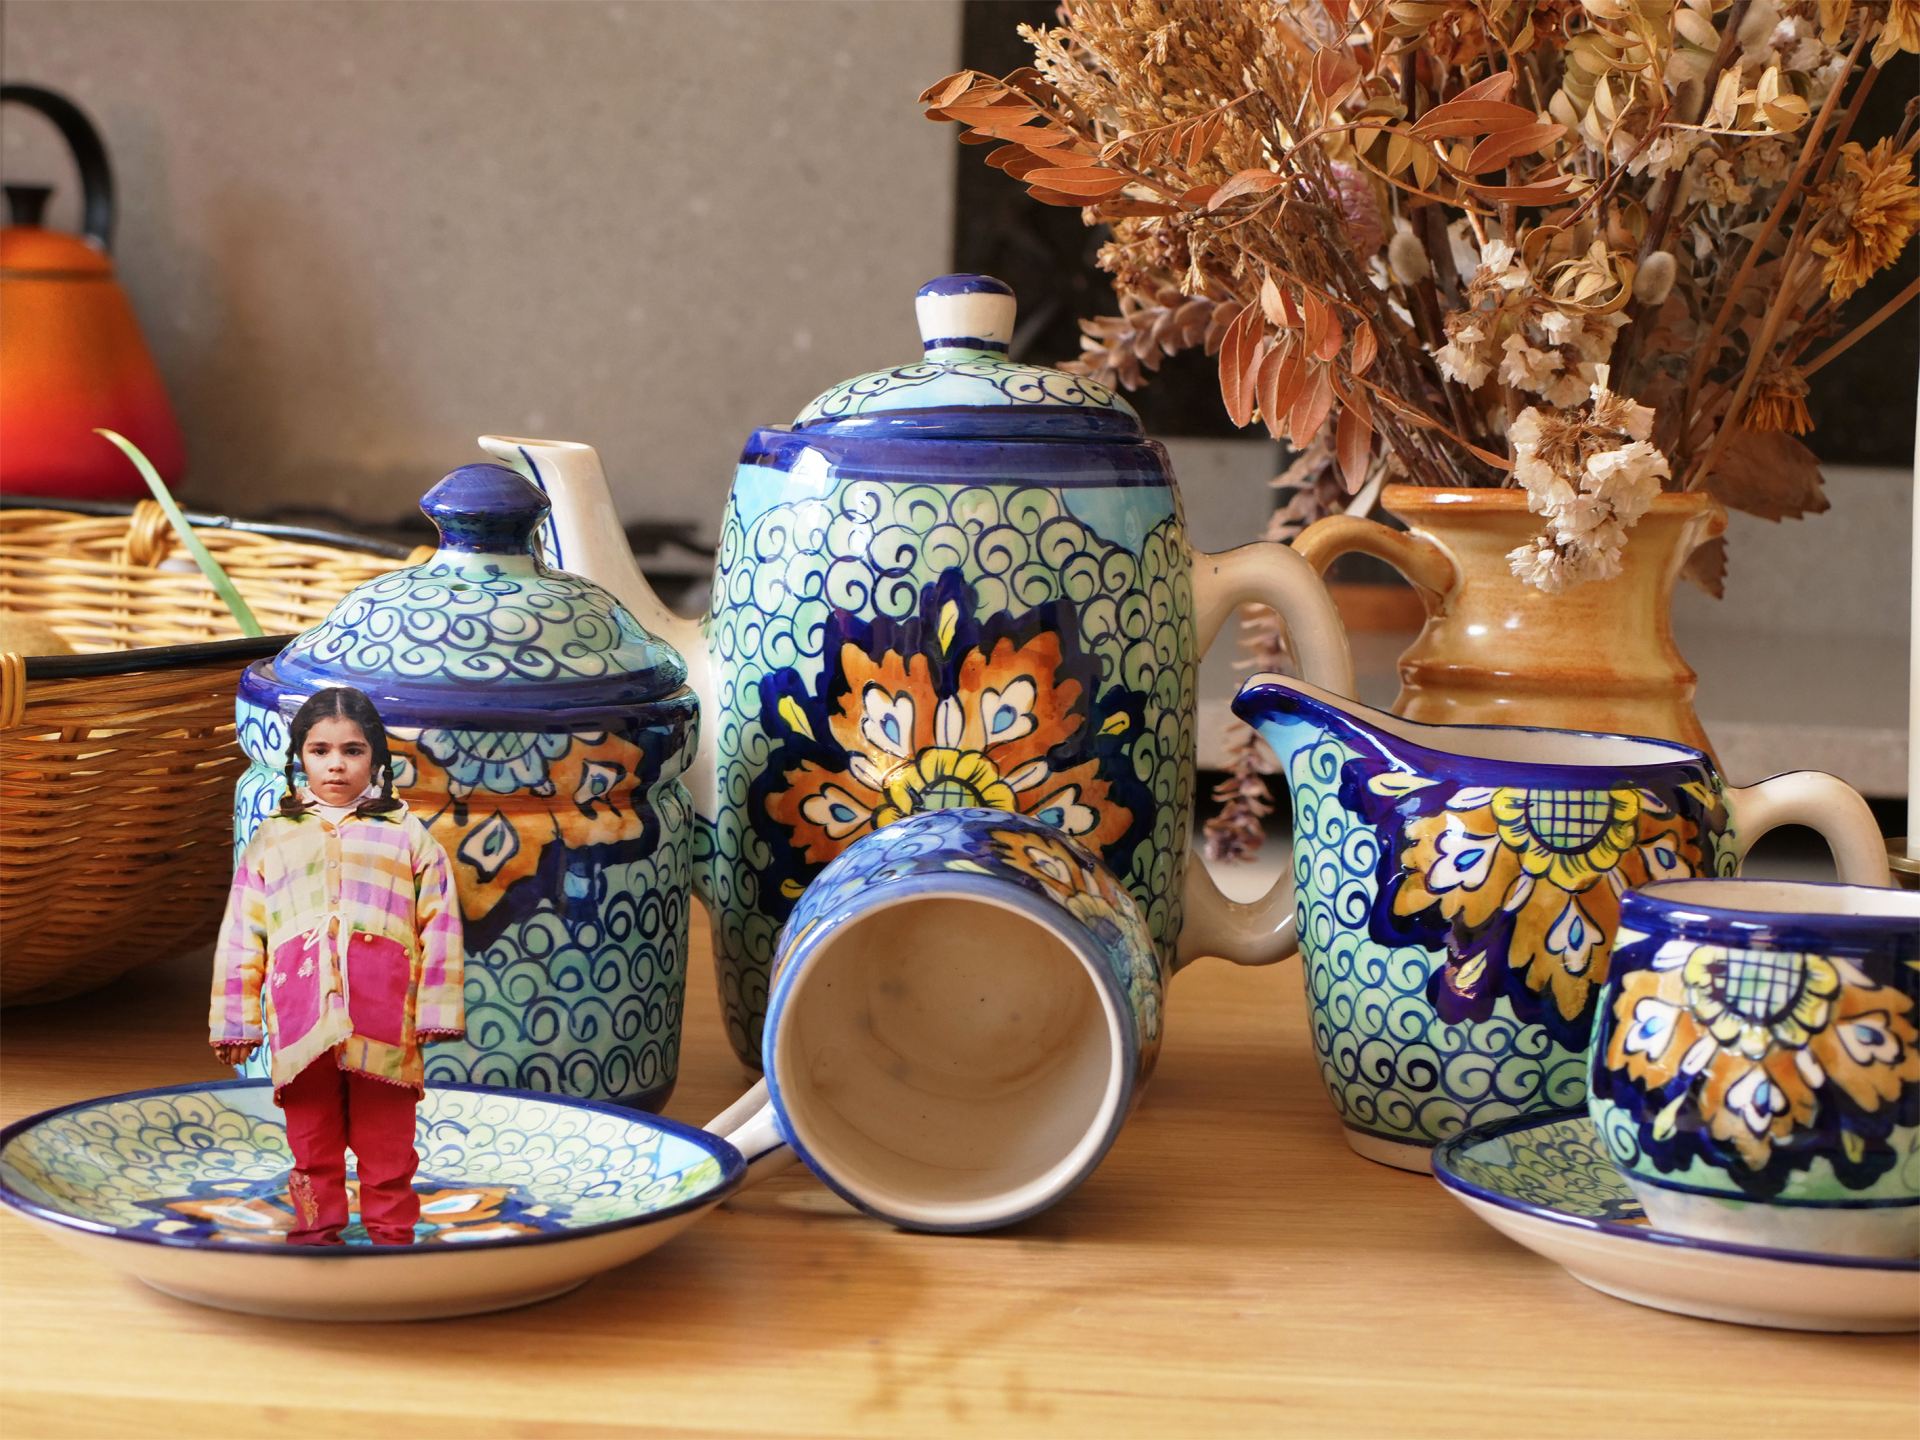 An image of a child juxtaposed amongst an ancestral ceramic tea set in a domestic setting.
